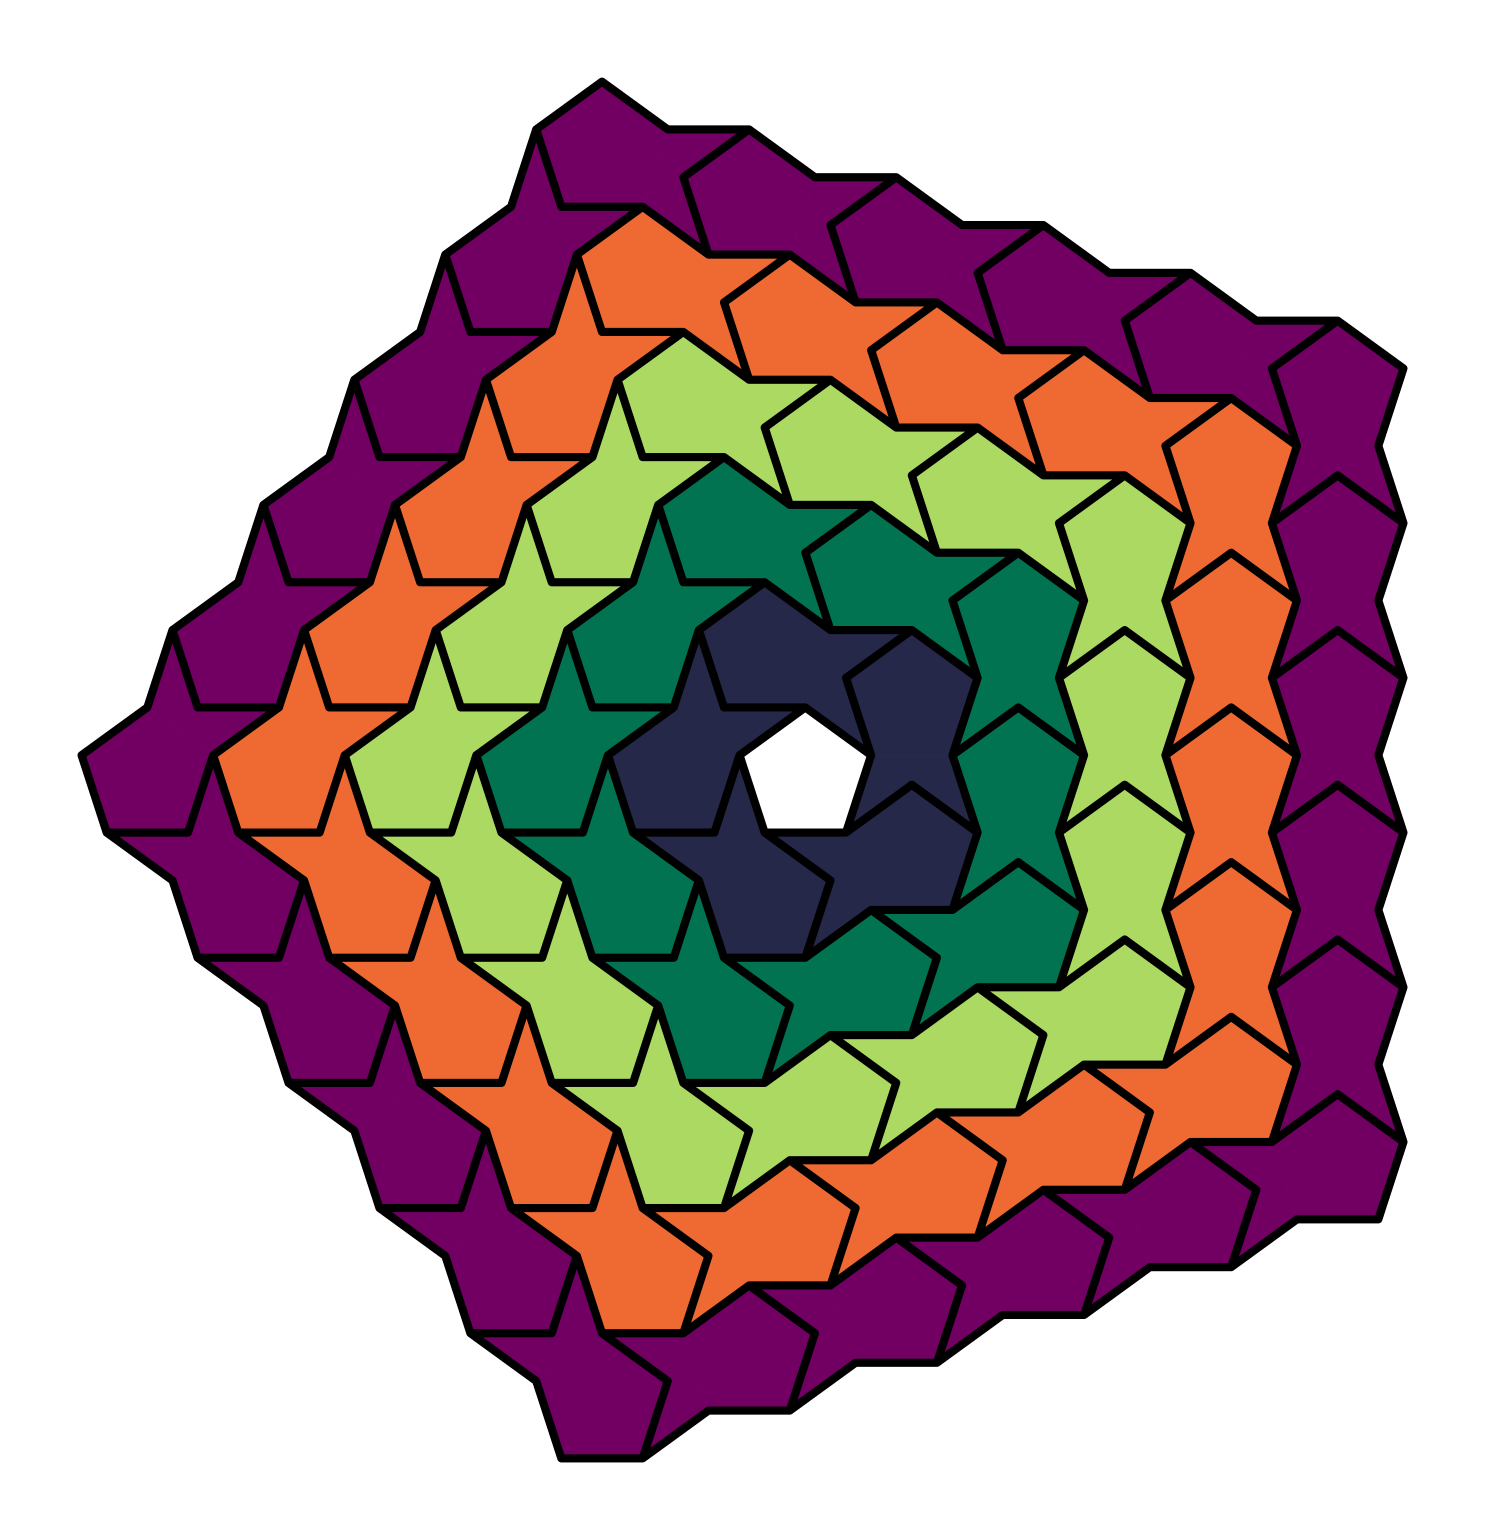 Rings on a plane - concentric pentaring pineapple tiling.